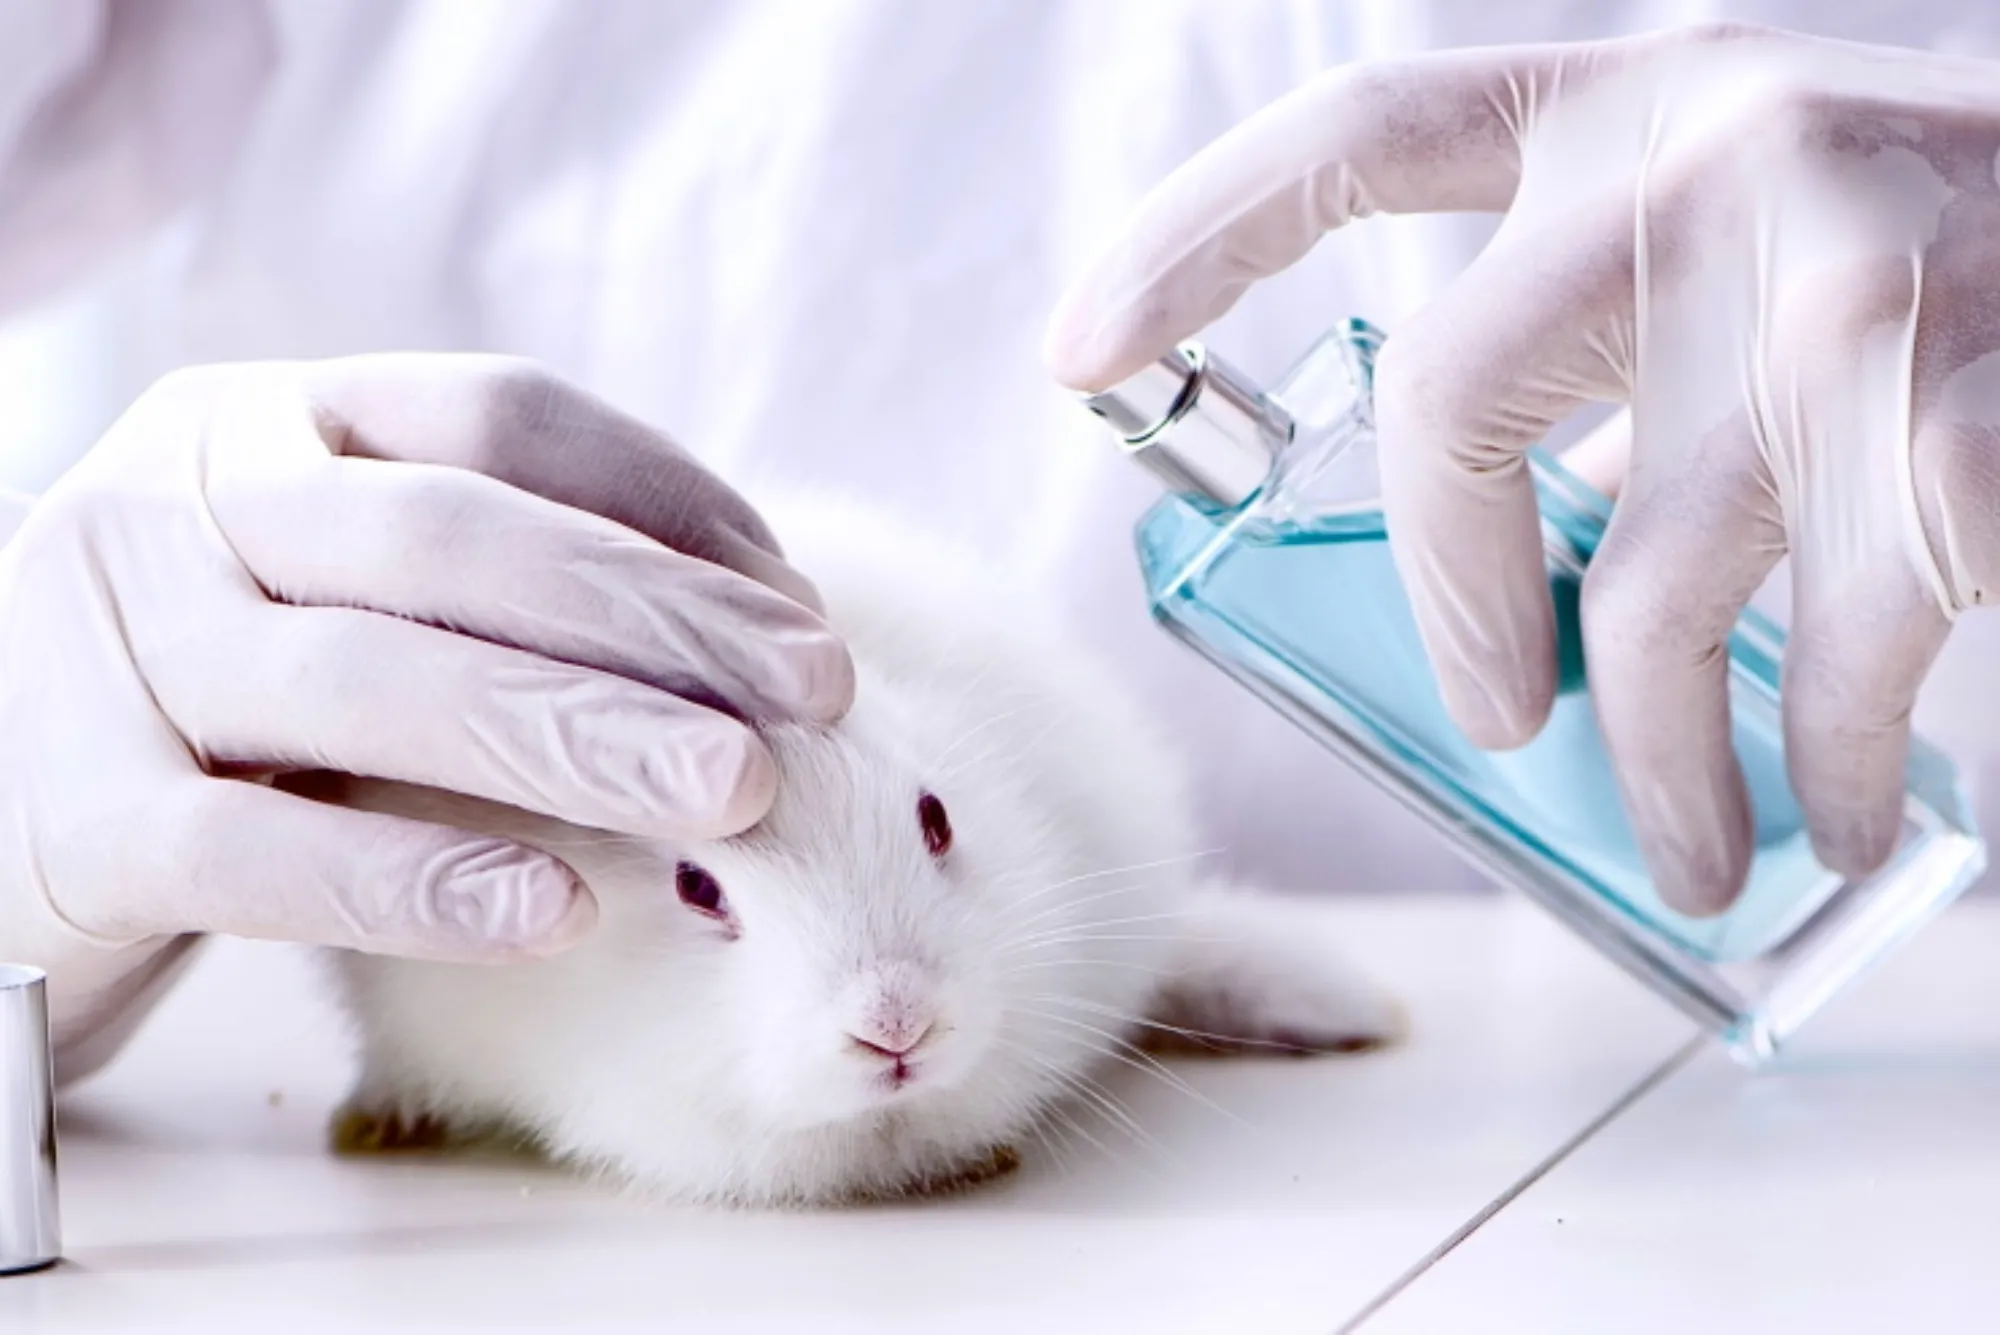 What Beauty Products Are Tested on Animals